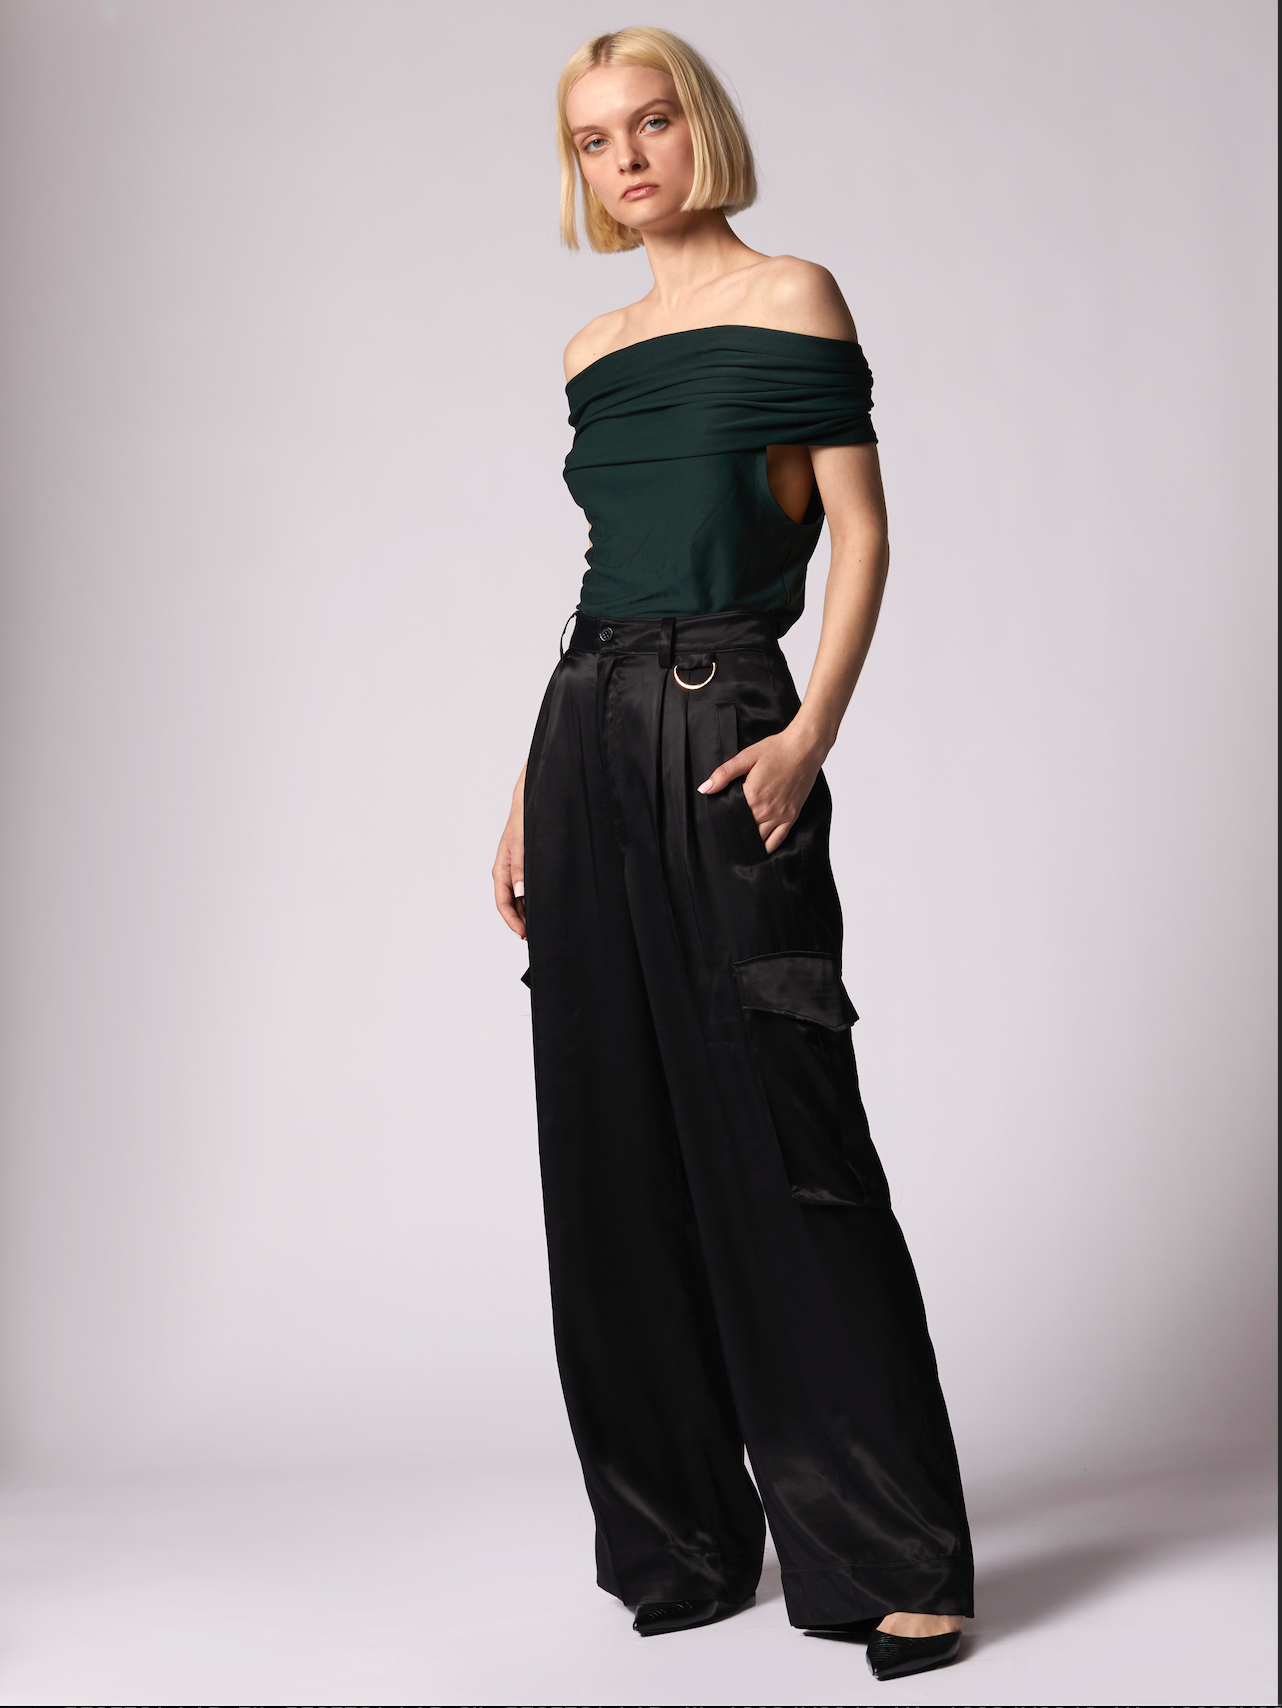 Anathilde Trouser by Equipment